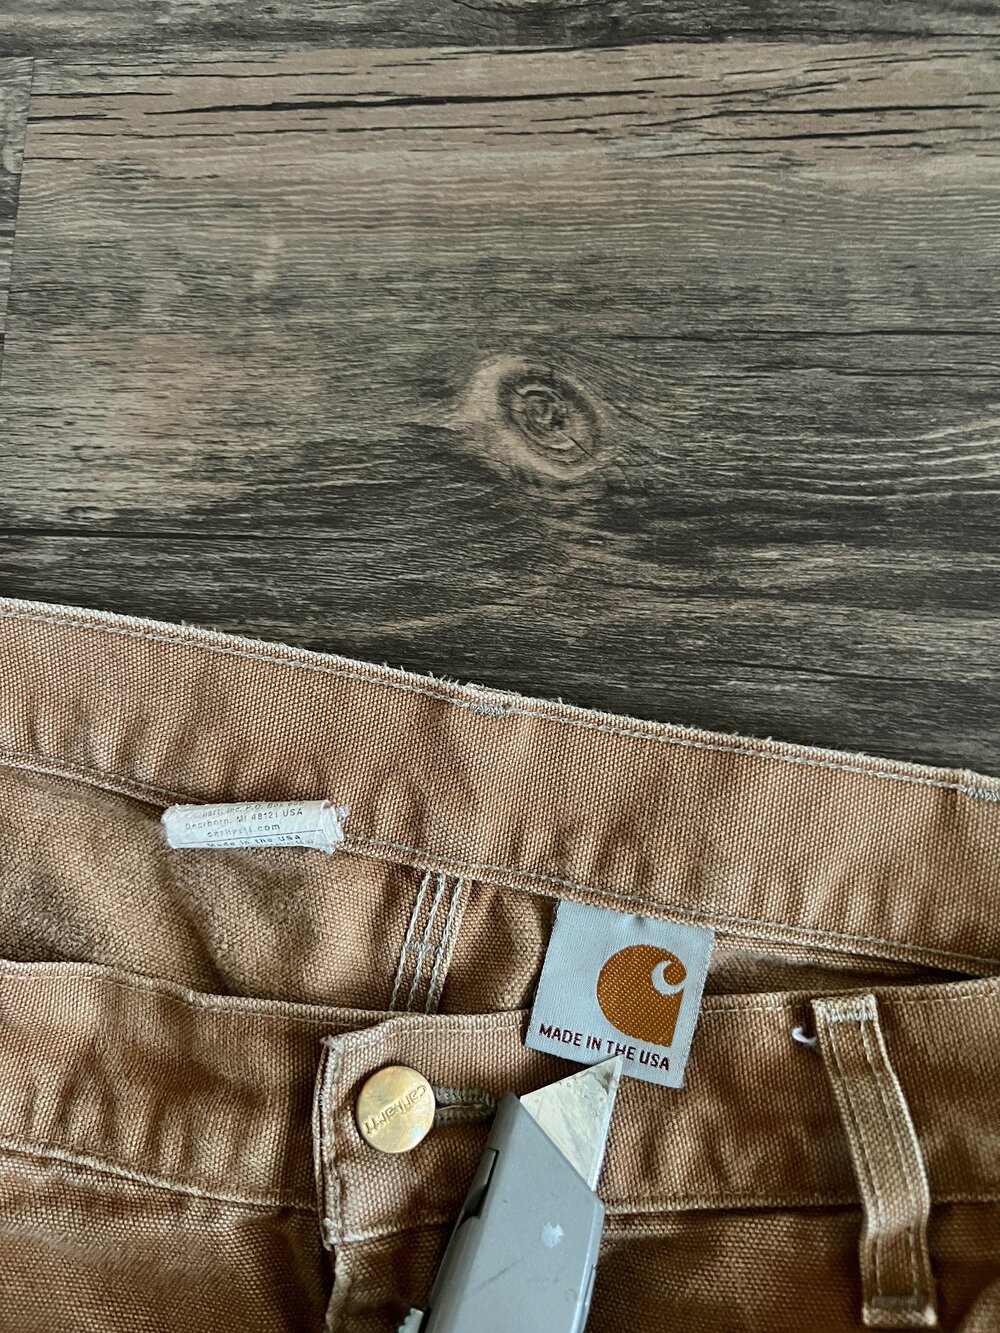 Vintage CARHARTT Distressed Carpenter Pants – two&from